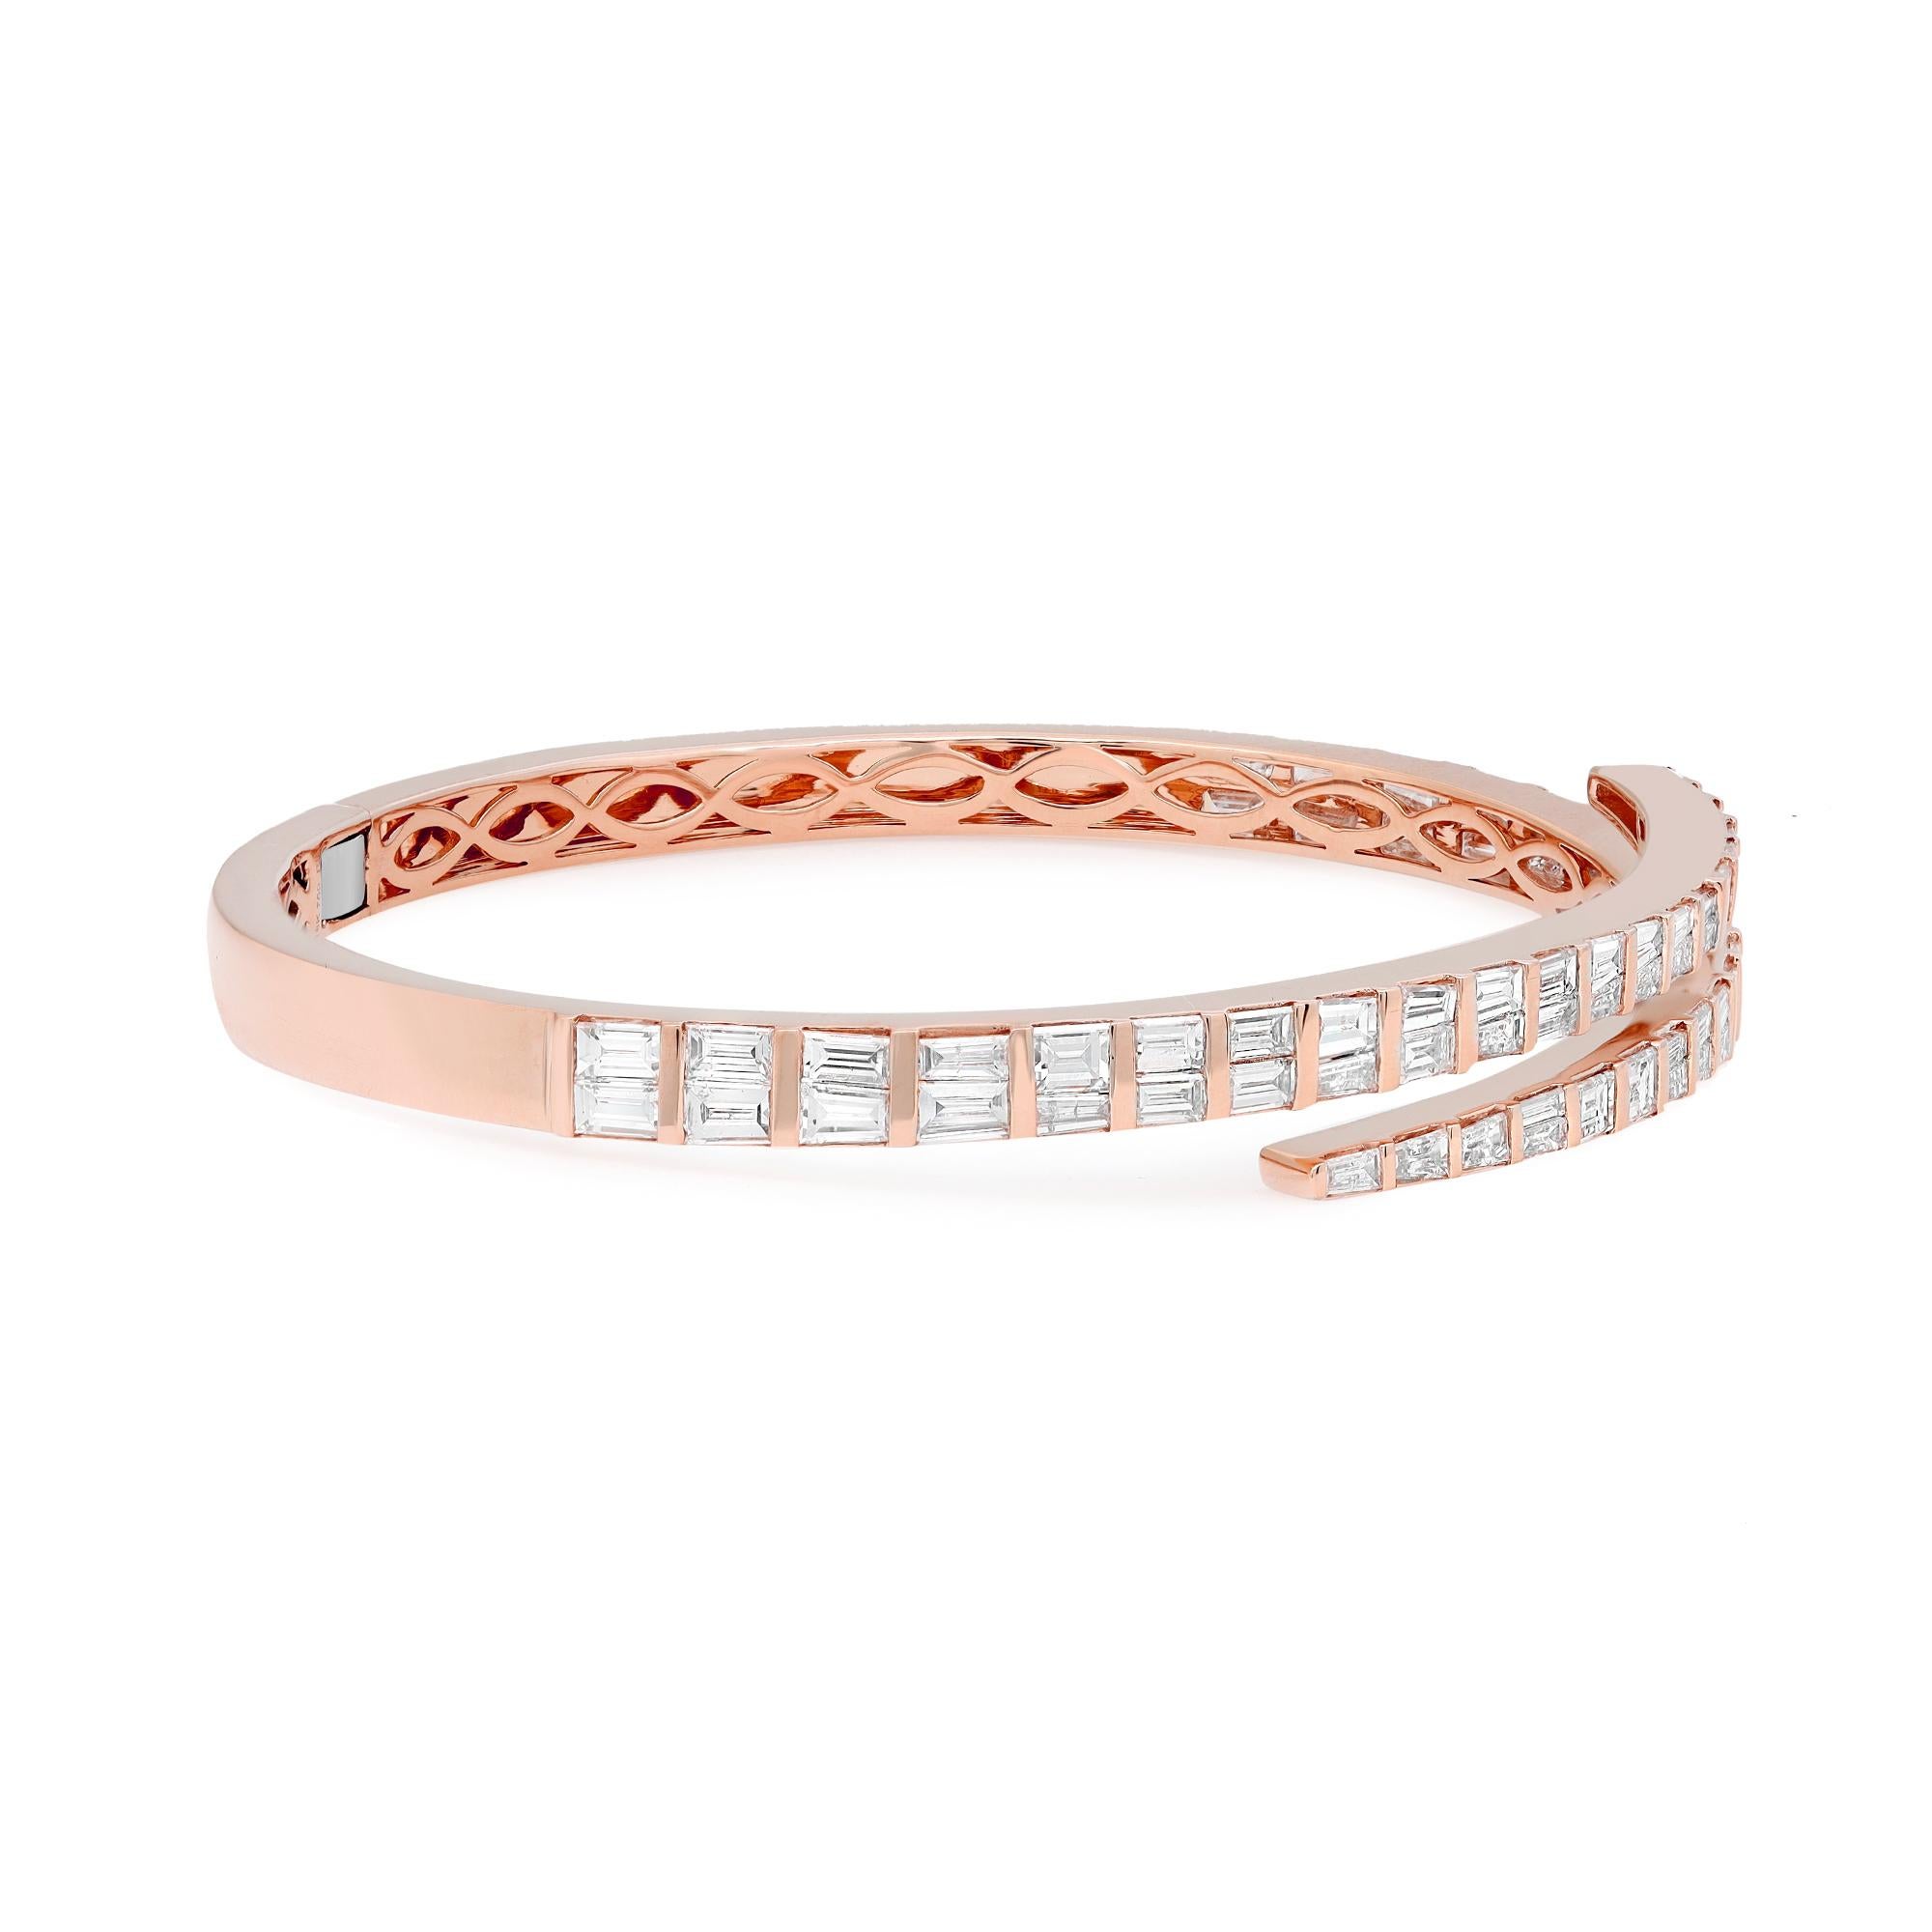 Let your style shine with this fancy and elegant diamond bangle bracelet. Crafted in 18k rose gold. This stunning bracelet features 78 channel set tapered Baguette cut shimmering diamonds with a total weight of 4.36 carats. Diamond color G-H and